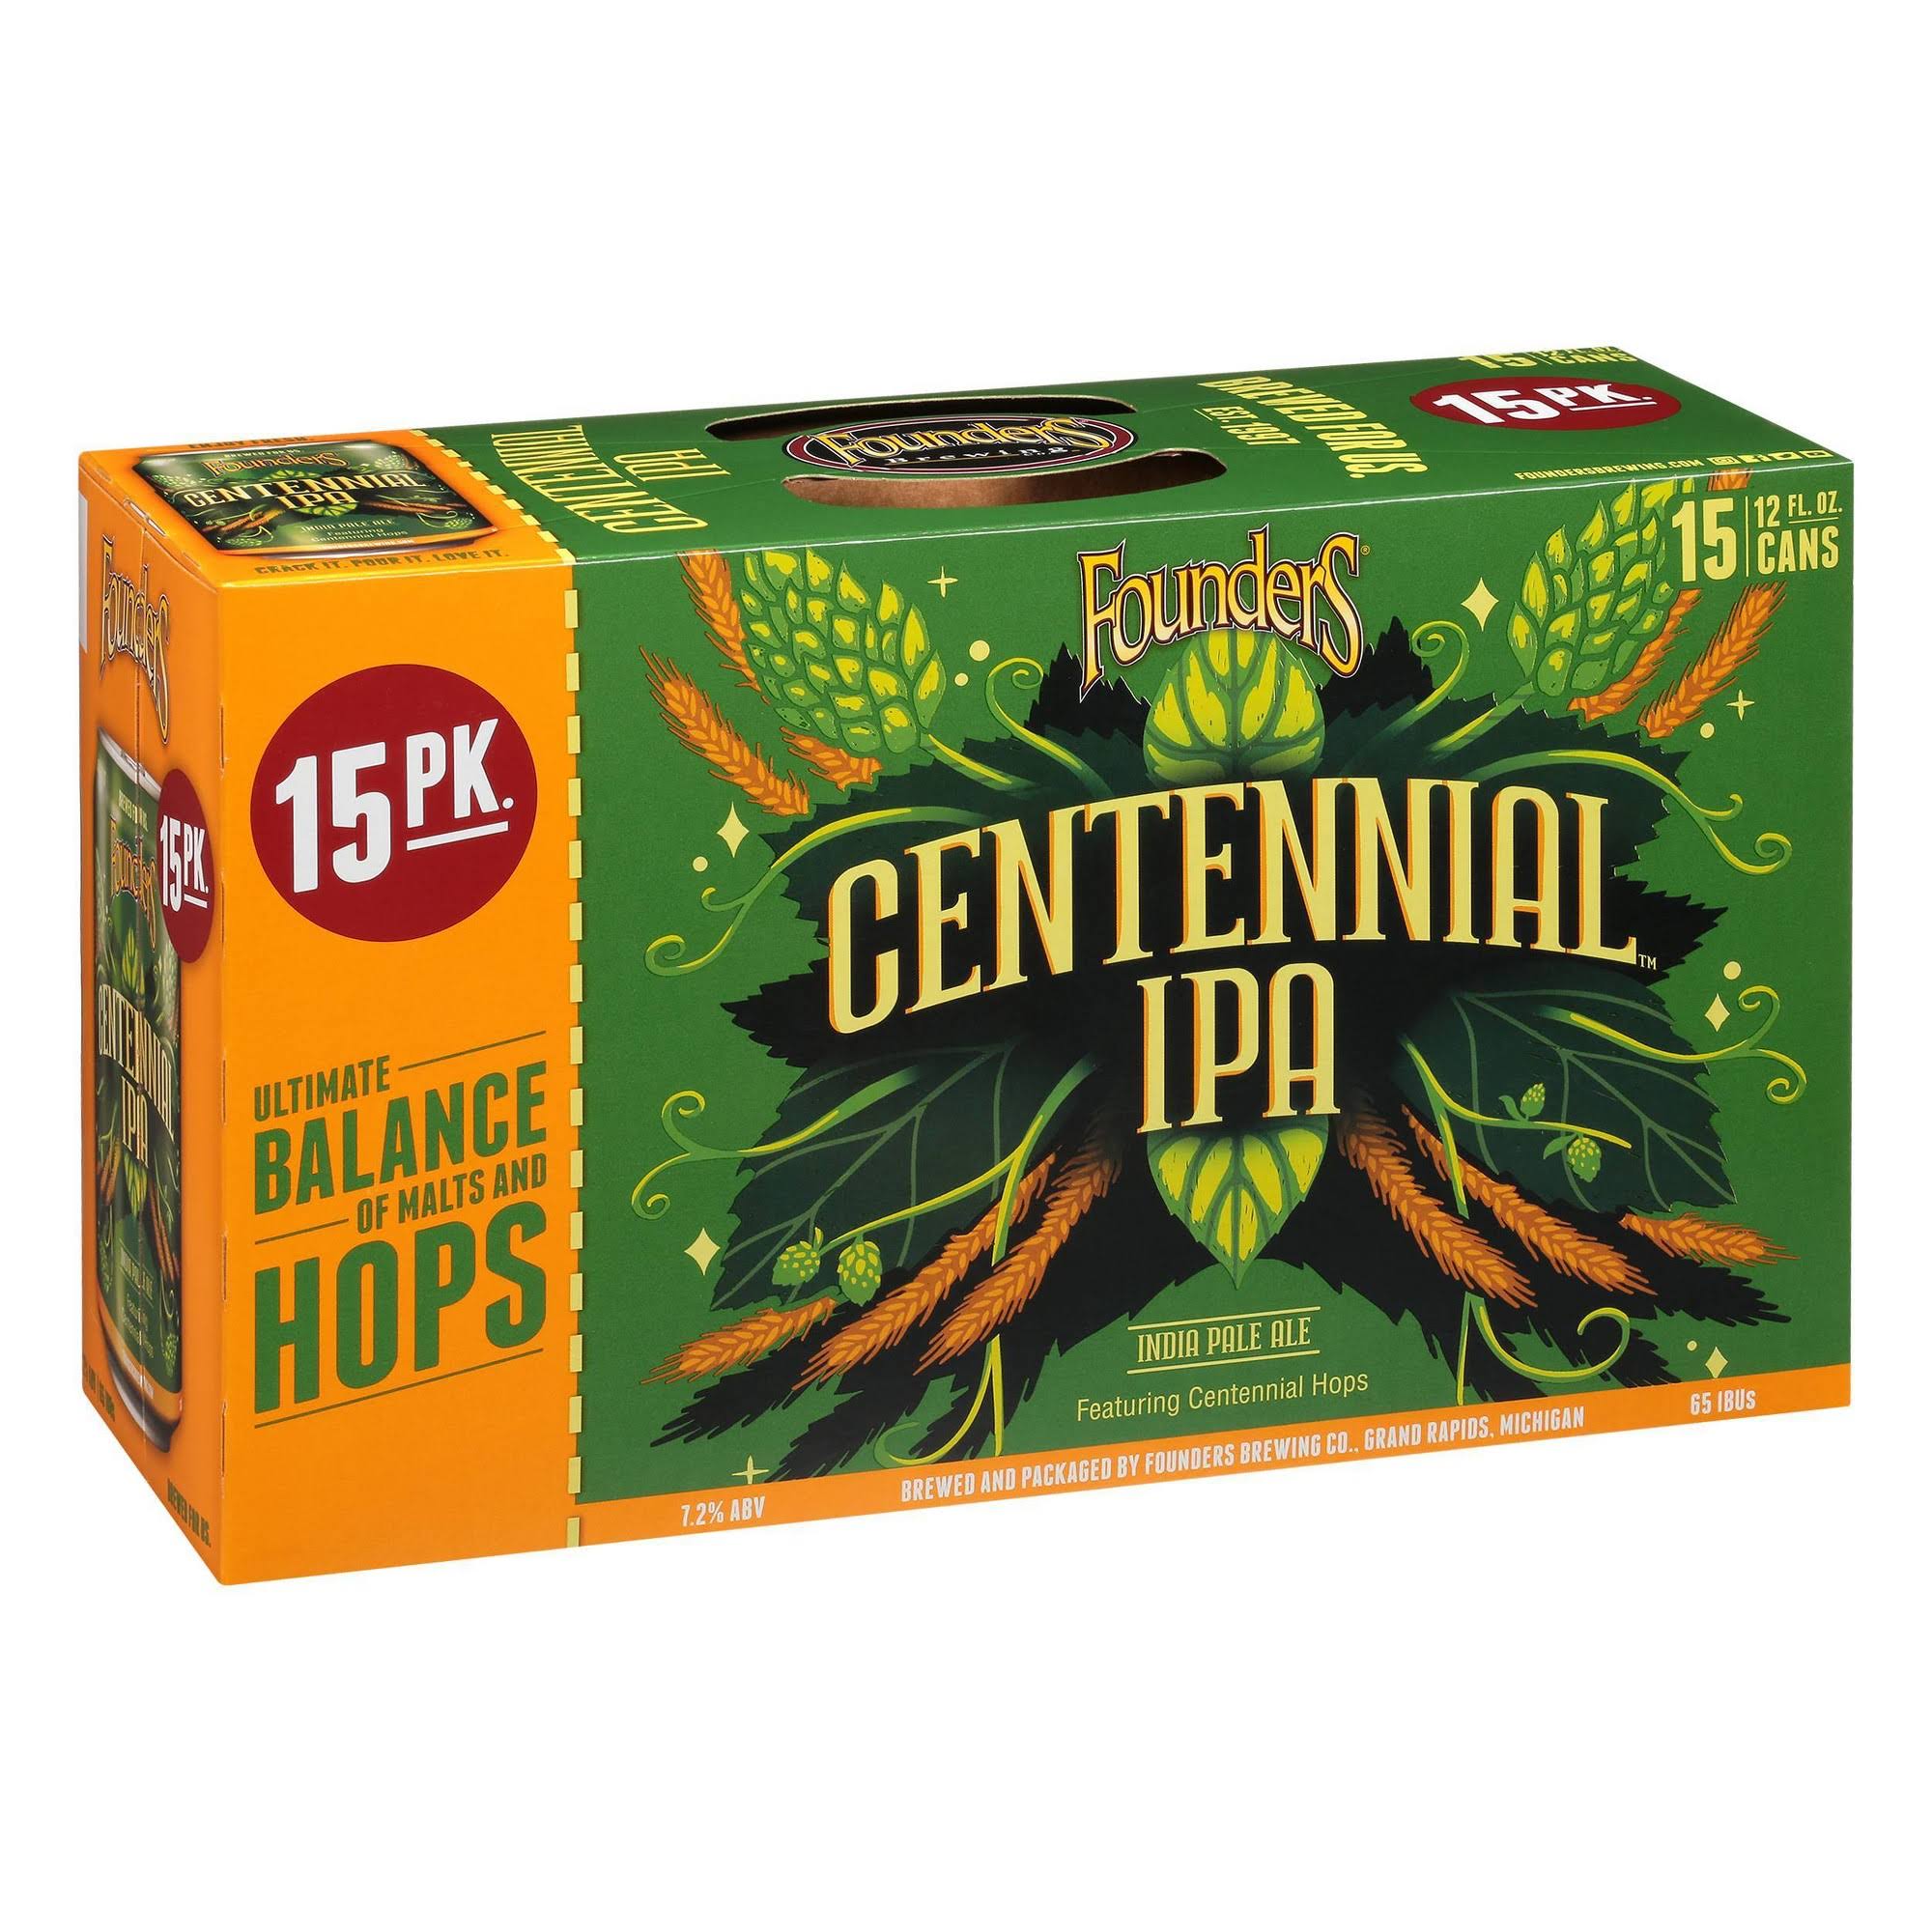 Founders Centennial IPA Beer, Indian Pale Ale, 15 Pack - 15 pack, 12 fl oz cans